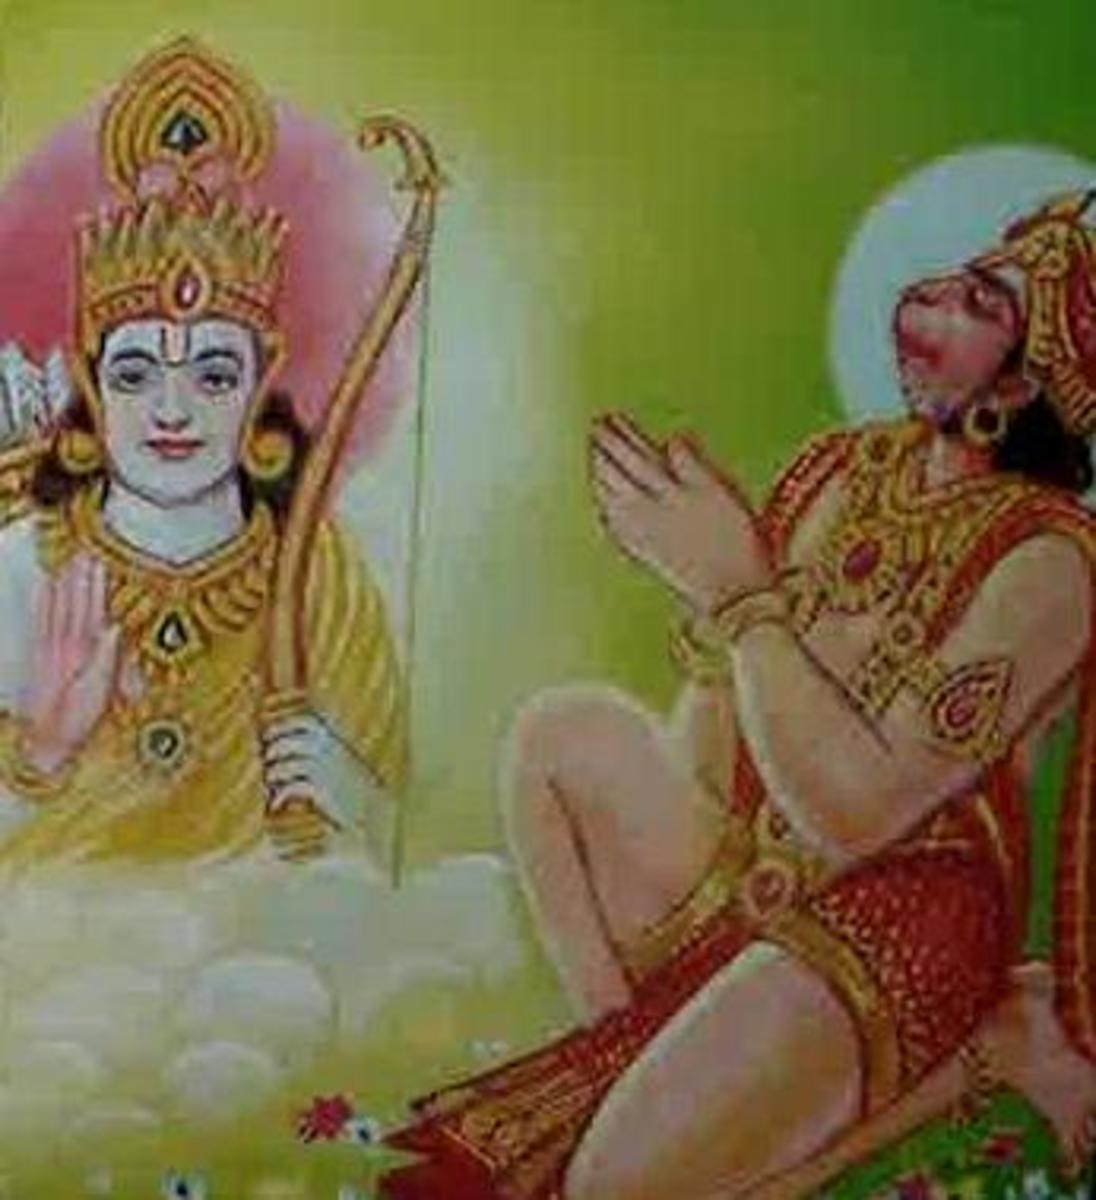 Picture depicting verse 34 of the Hanuman Chalisa